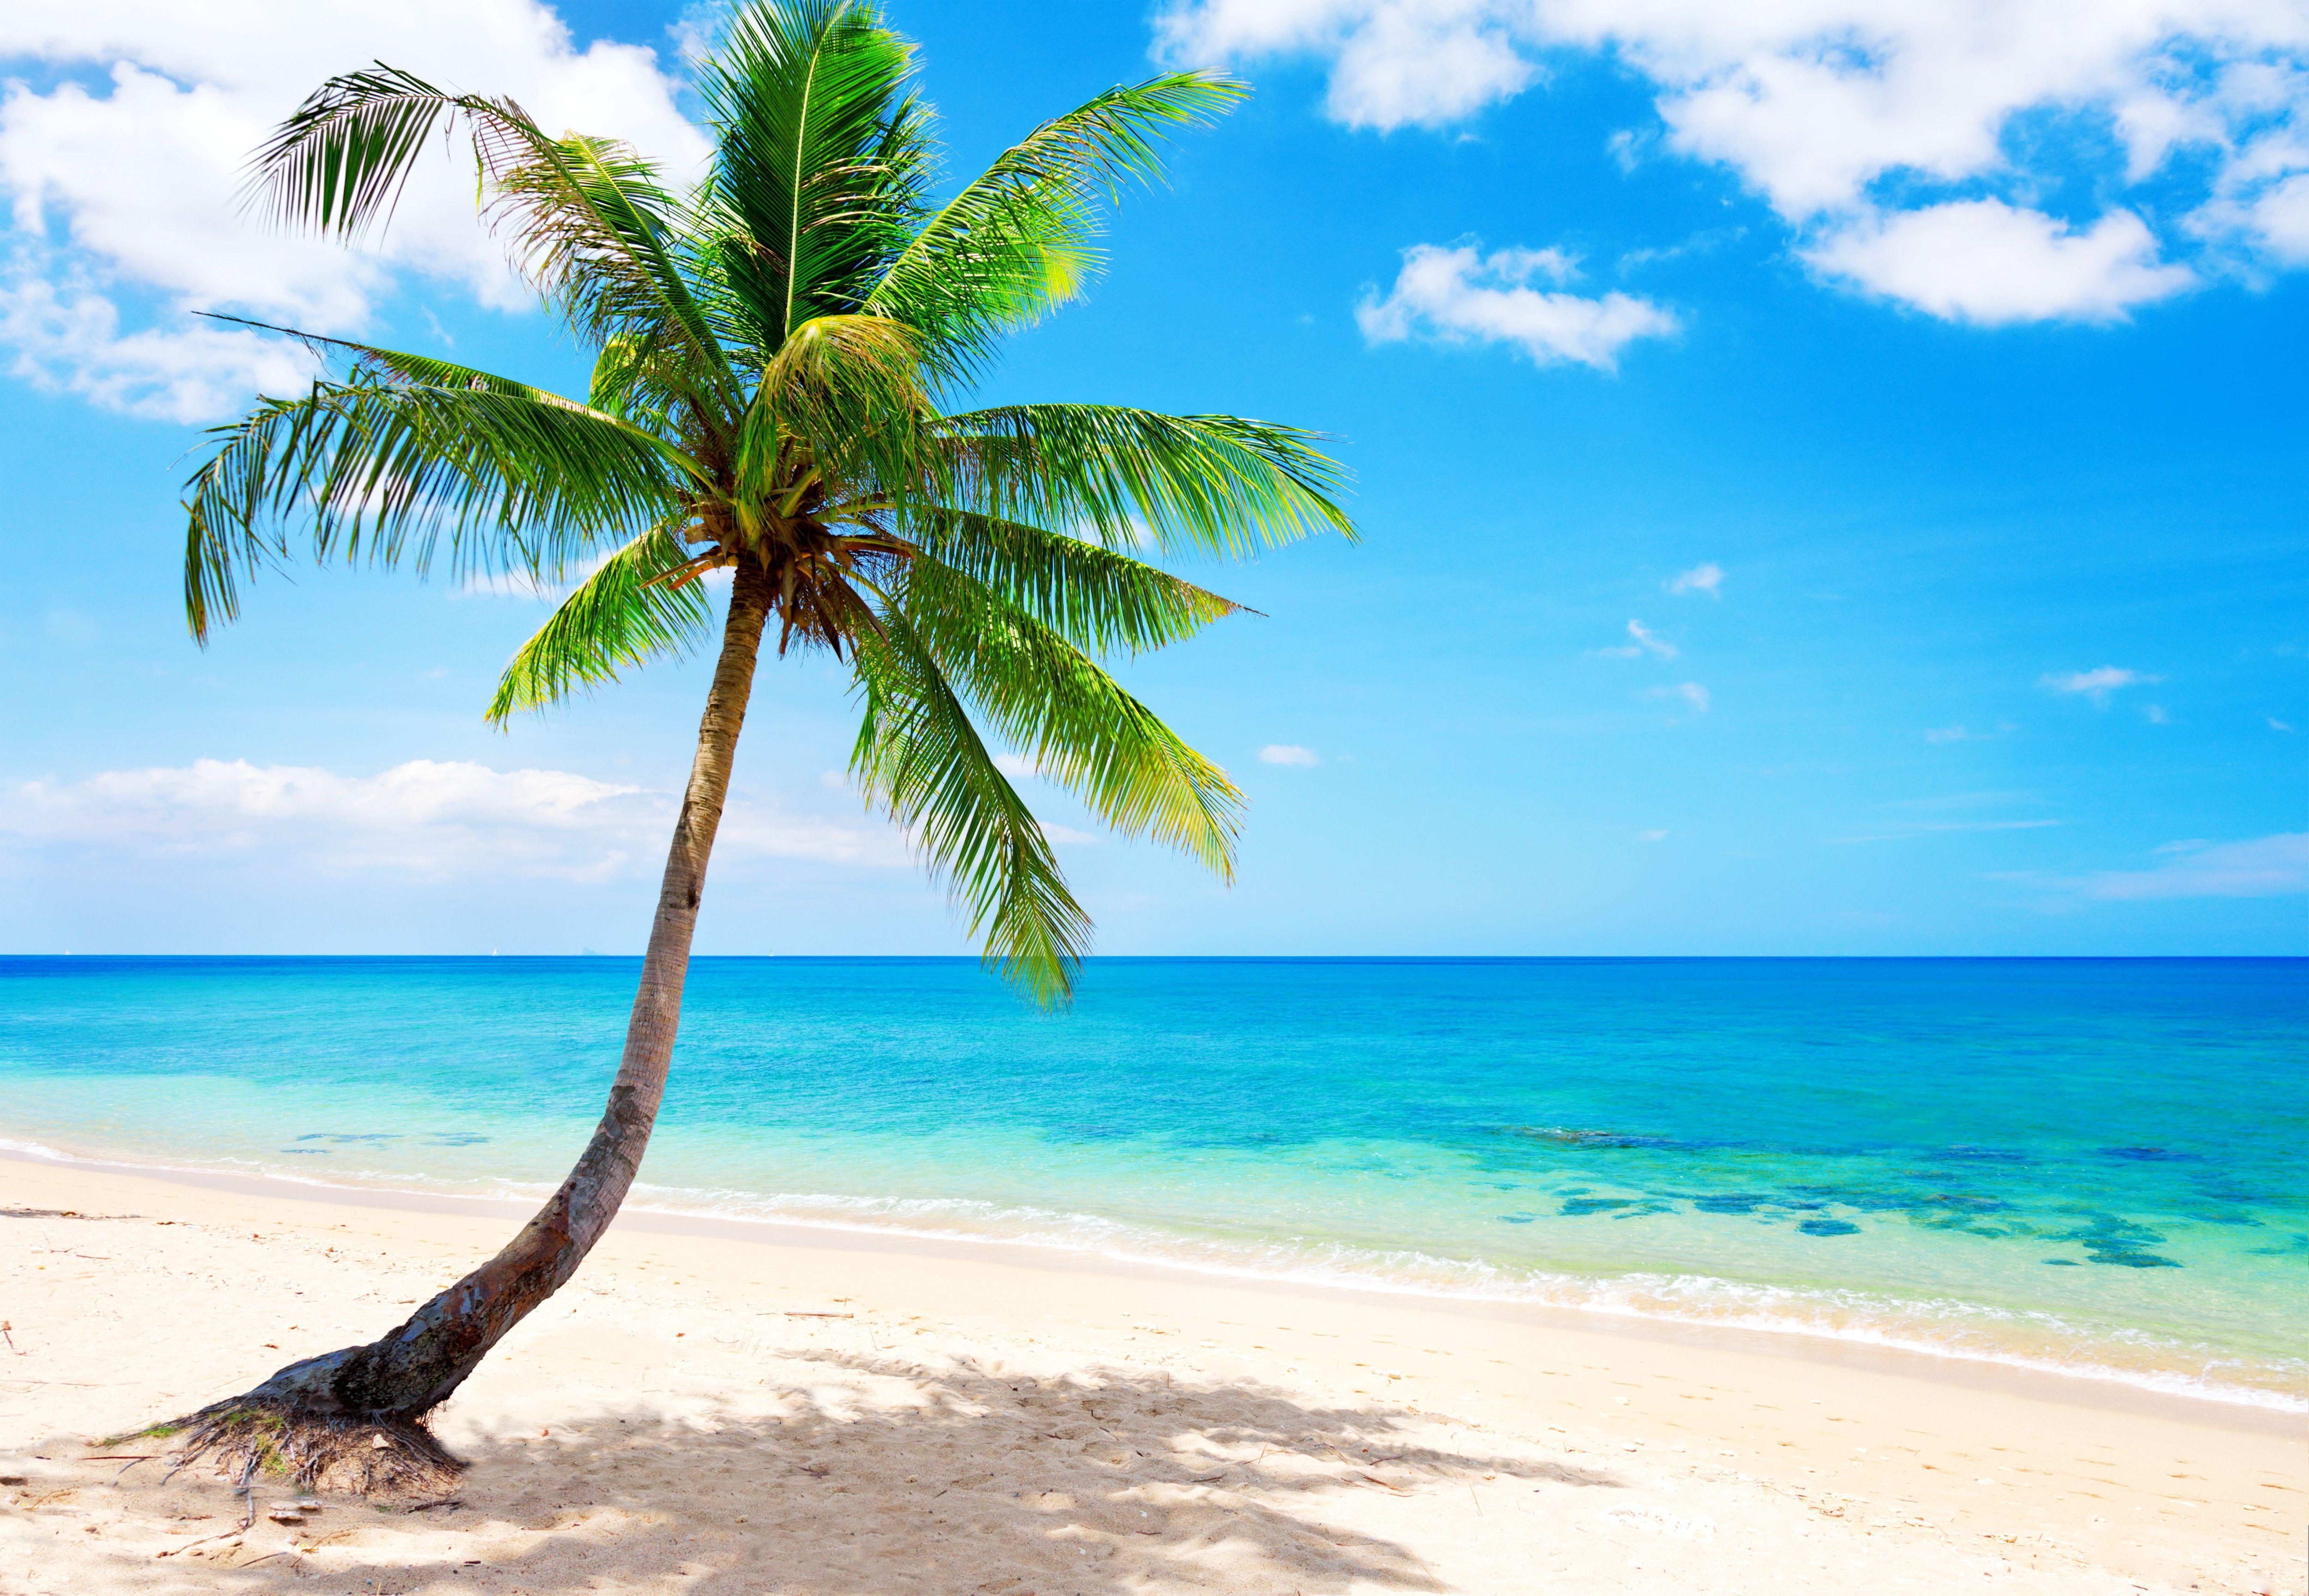 Palm Tree Beach Wallpapers - Top Free Palm Tree Beach Backgrounds